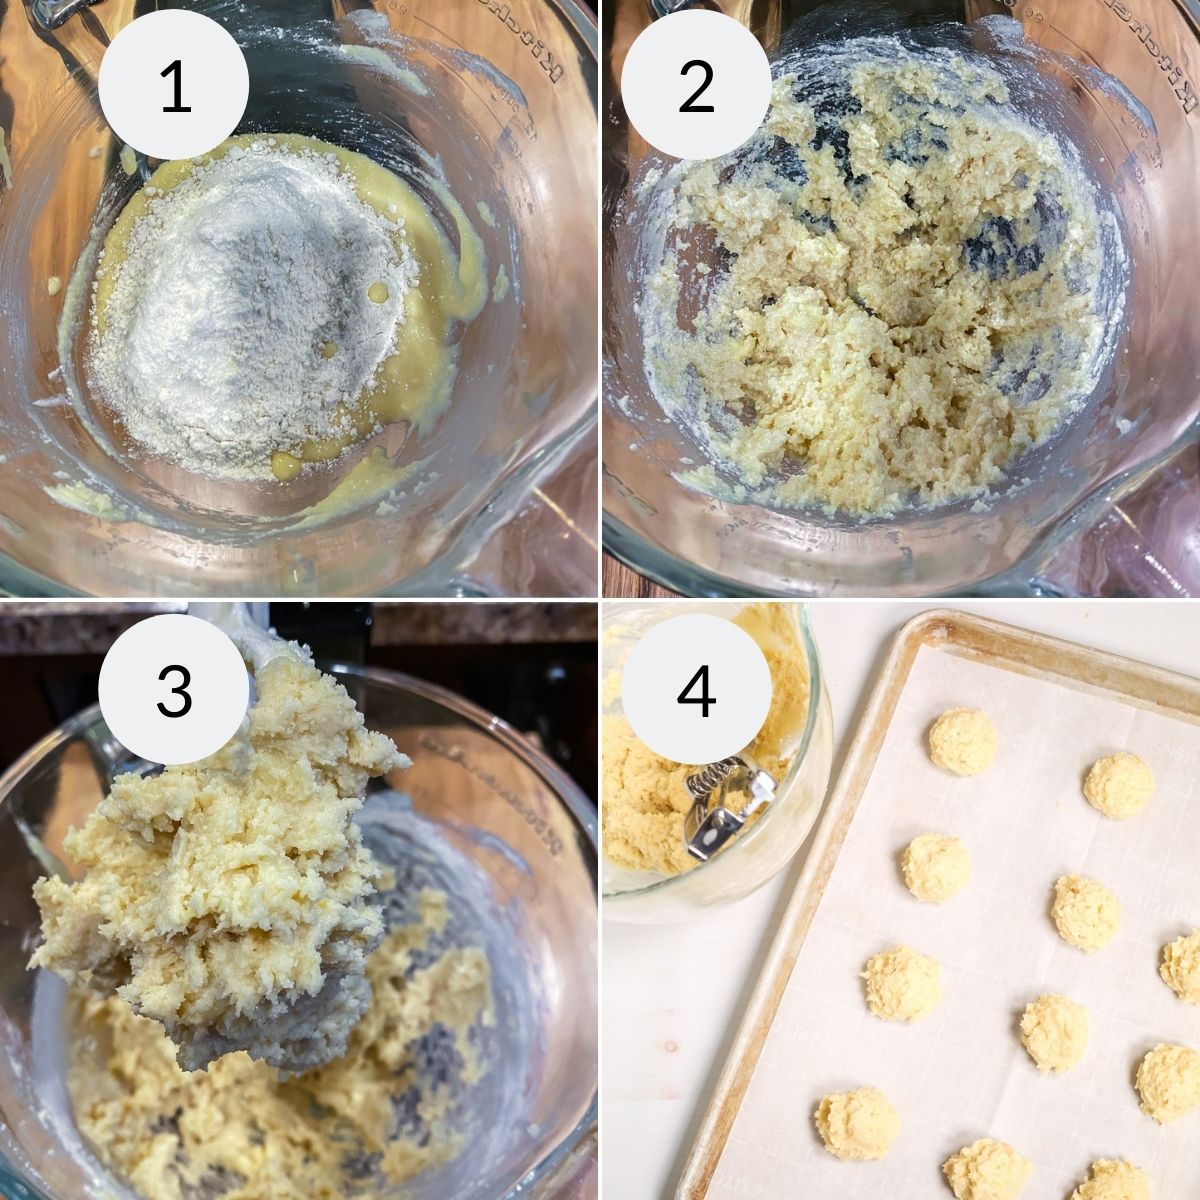 Mixing the cookie dough and placing on a baking tray.